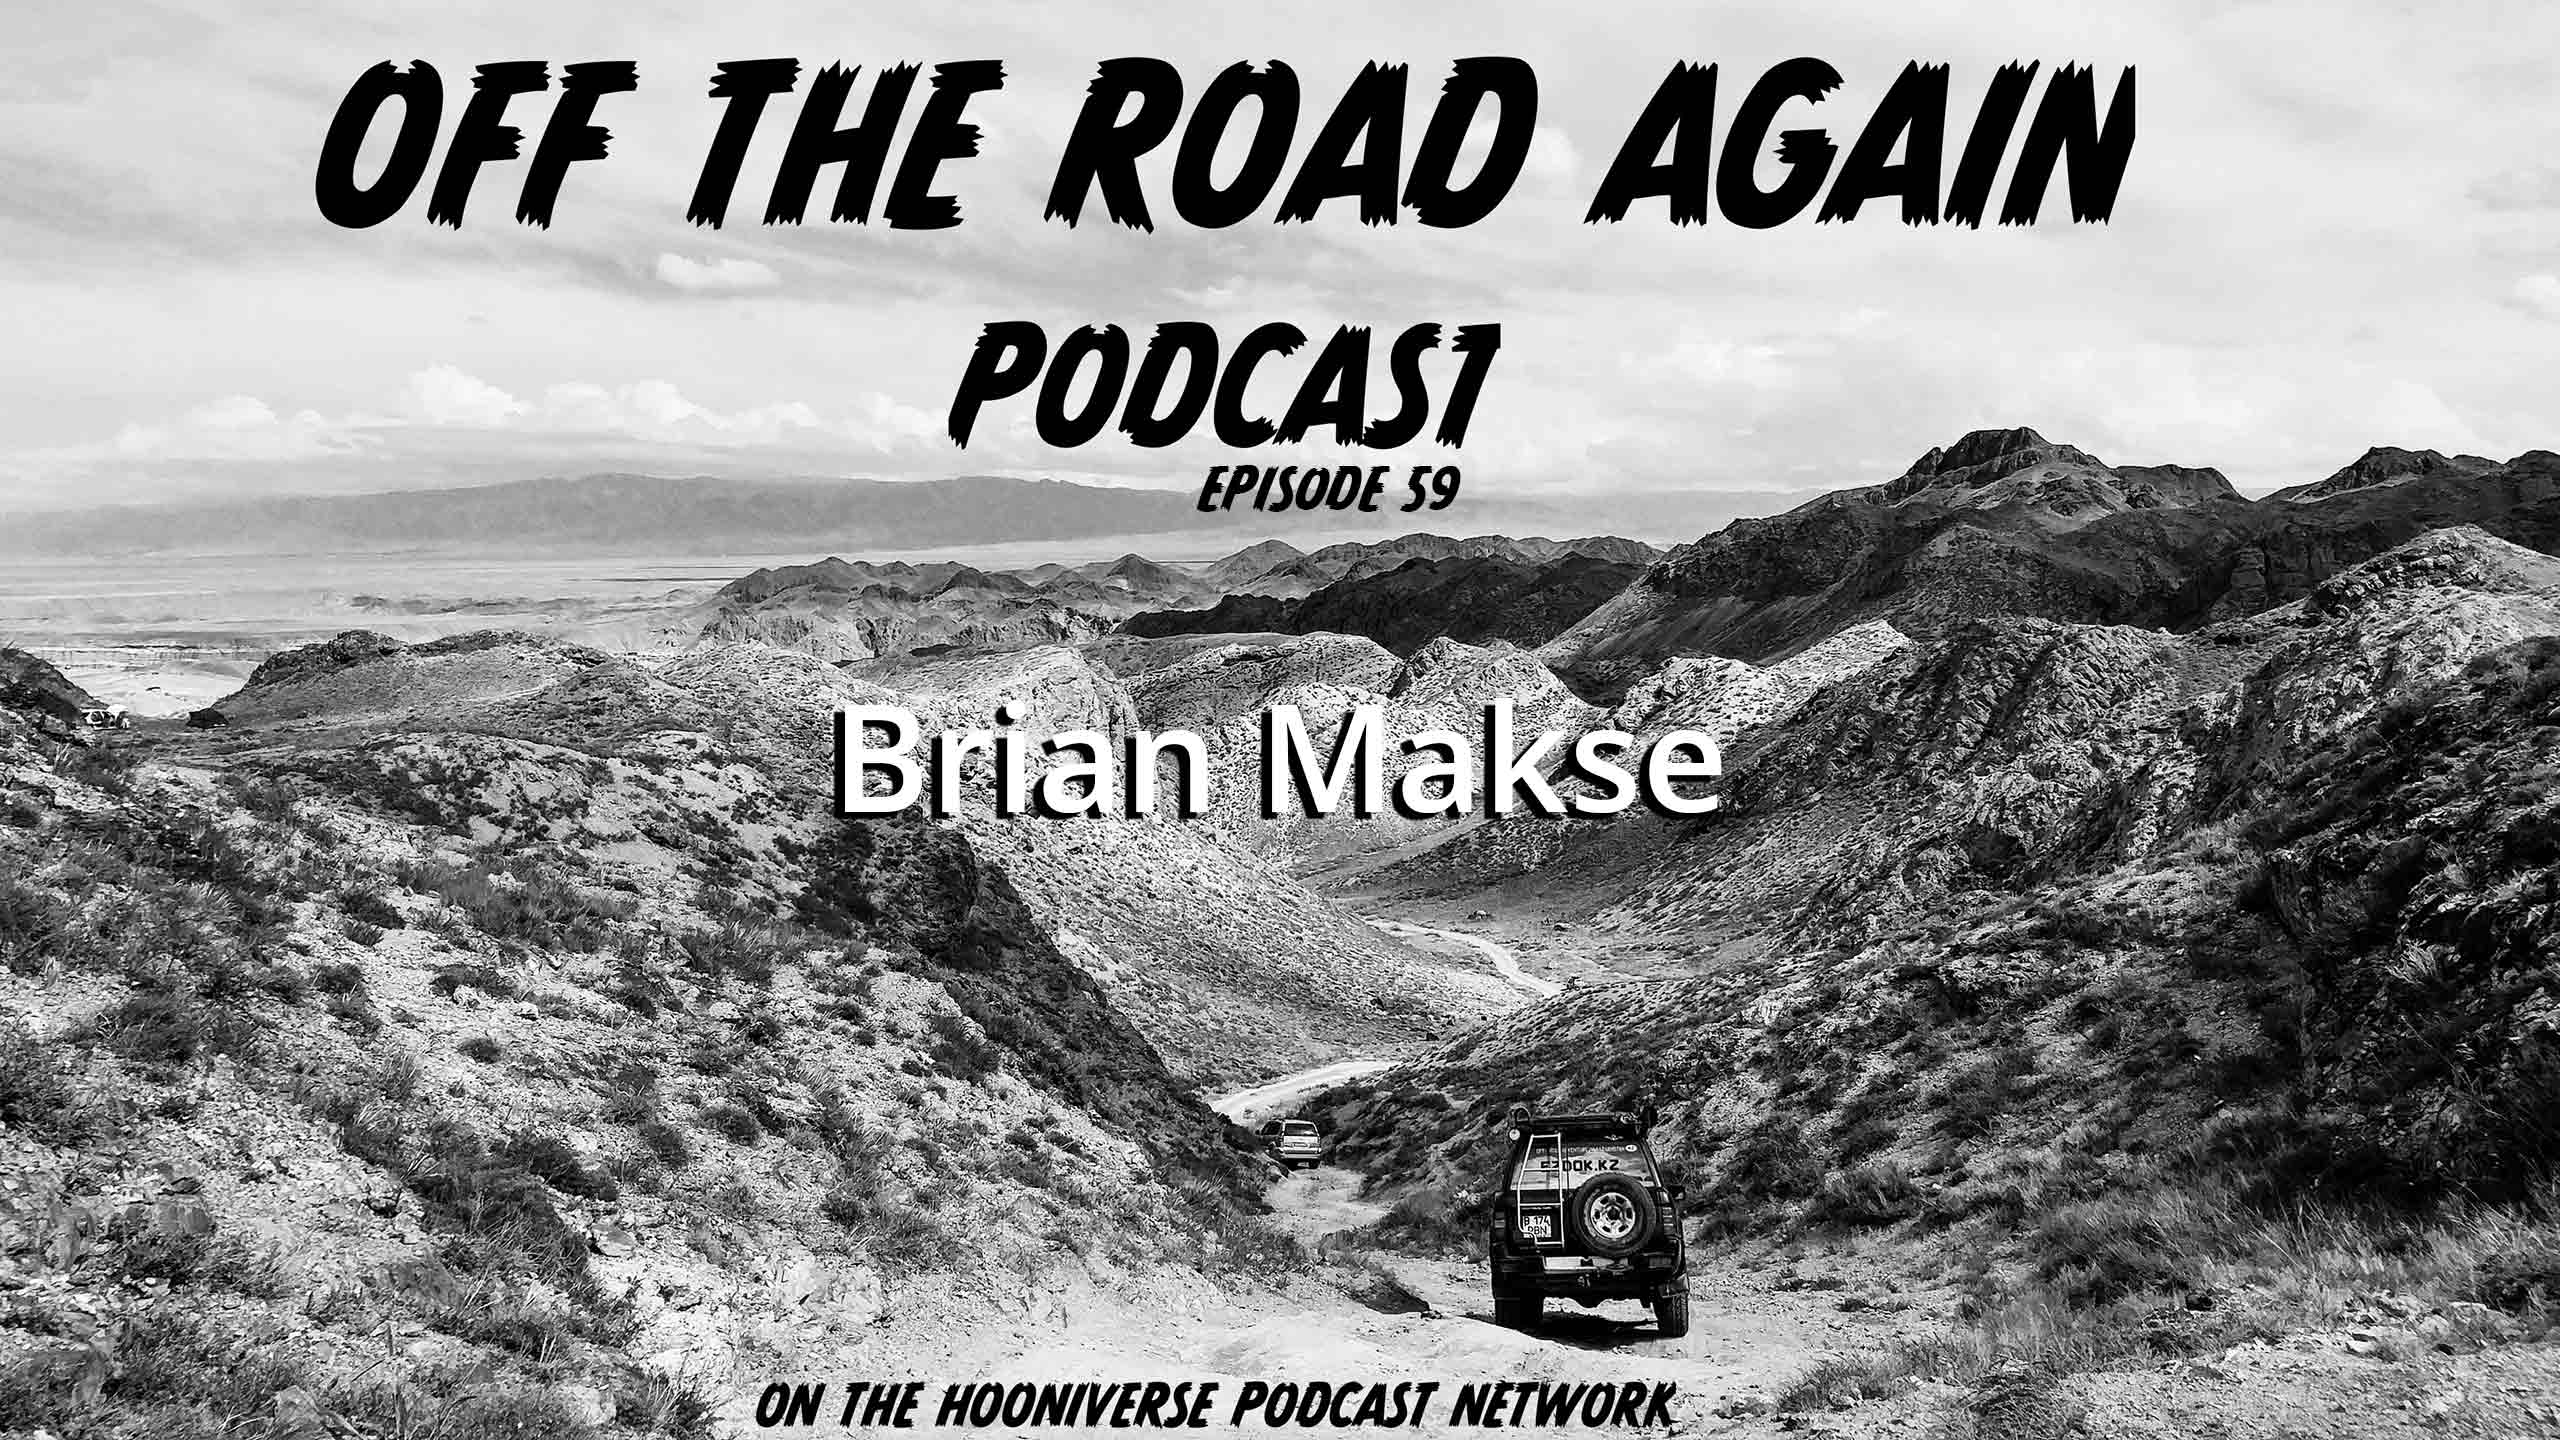 Brian-Makse-Off-The-Road-Again-Podcast-Episode-59